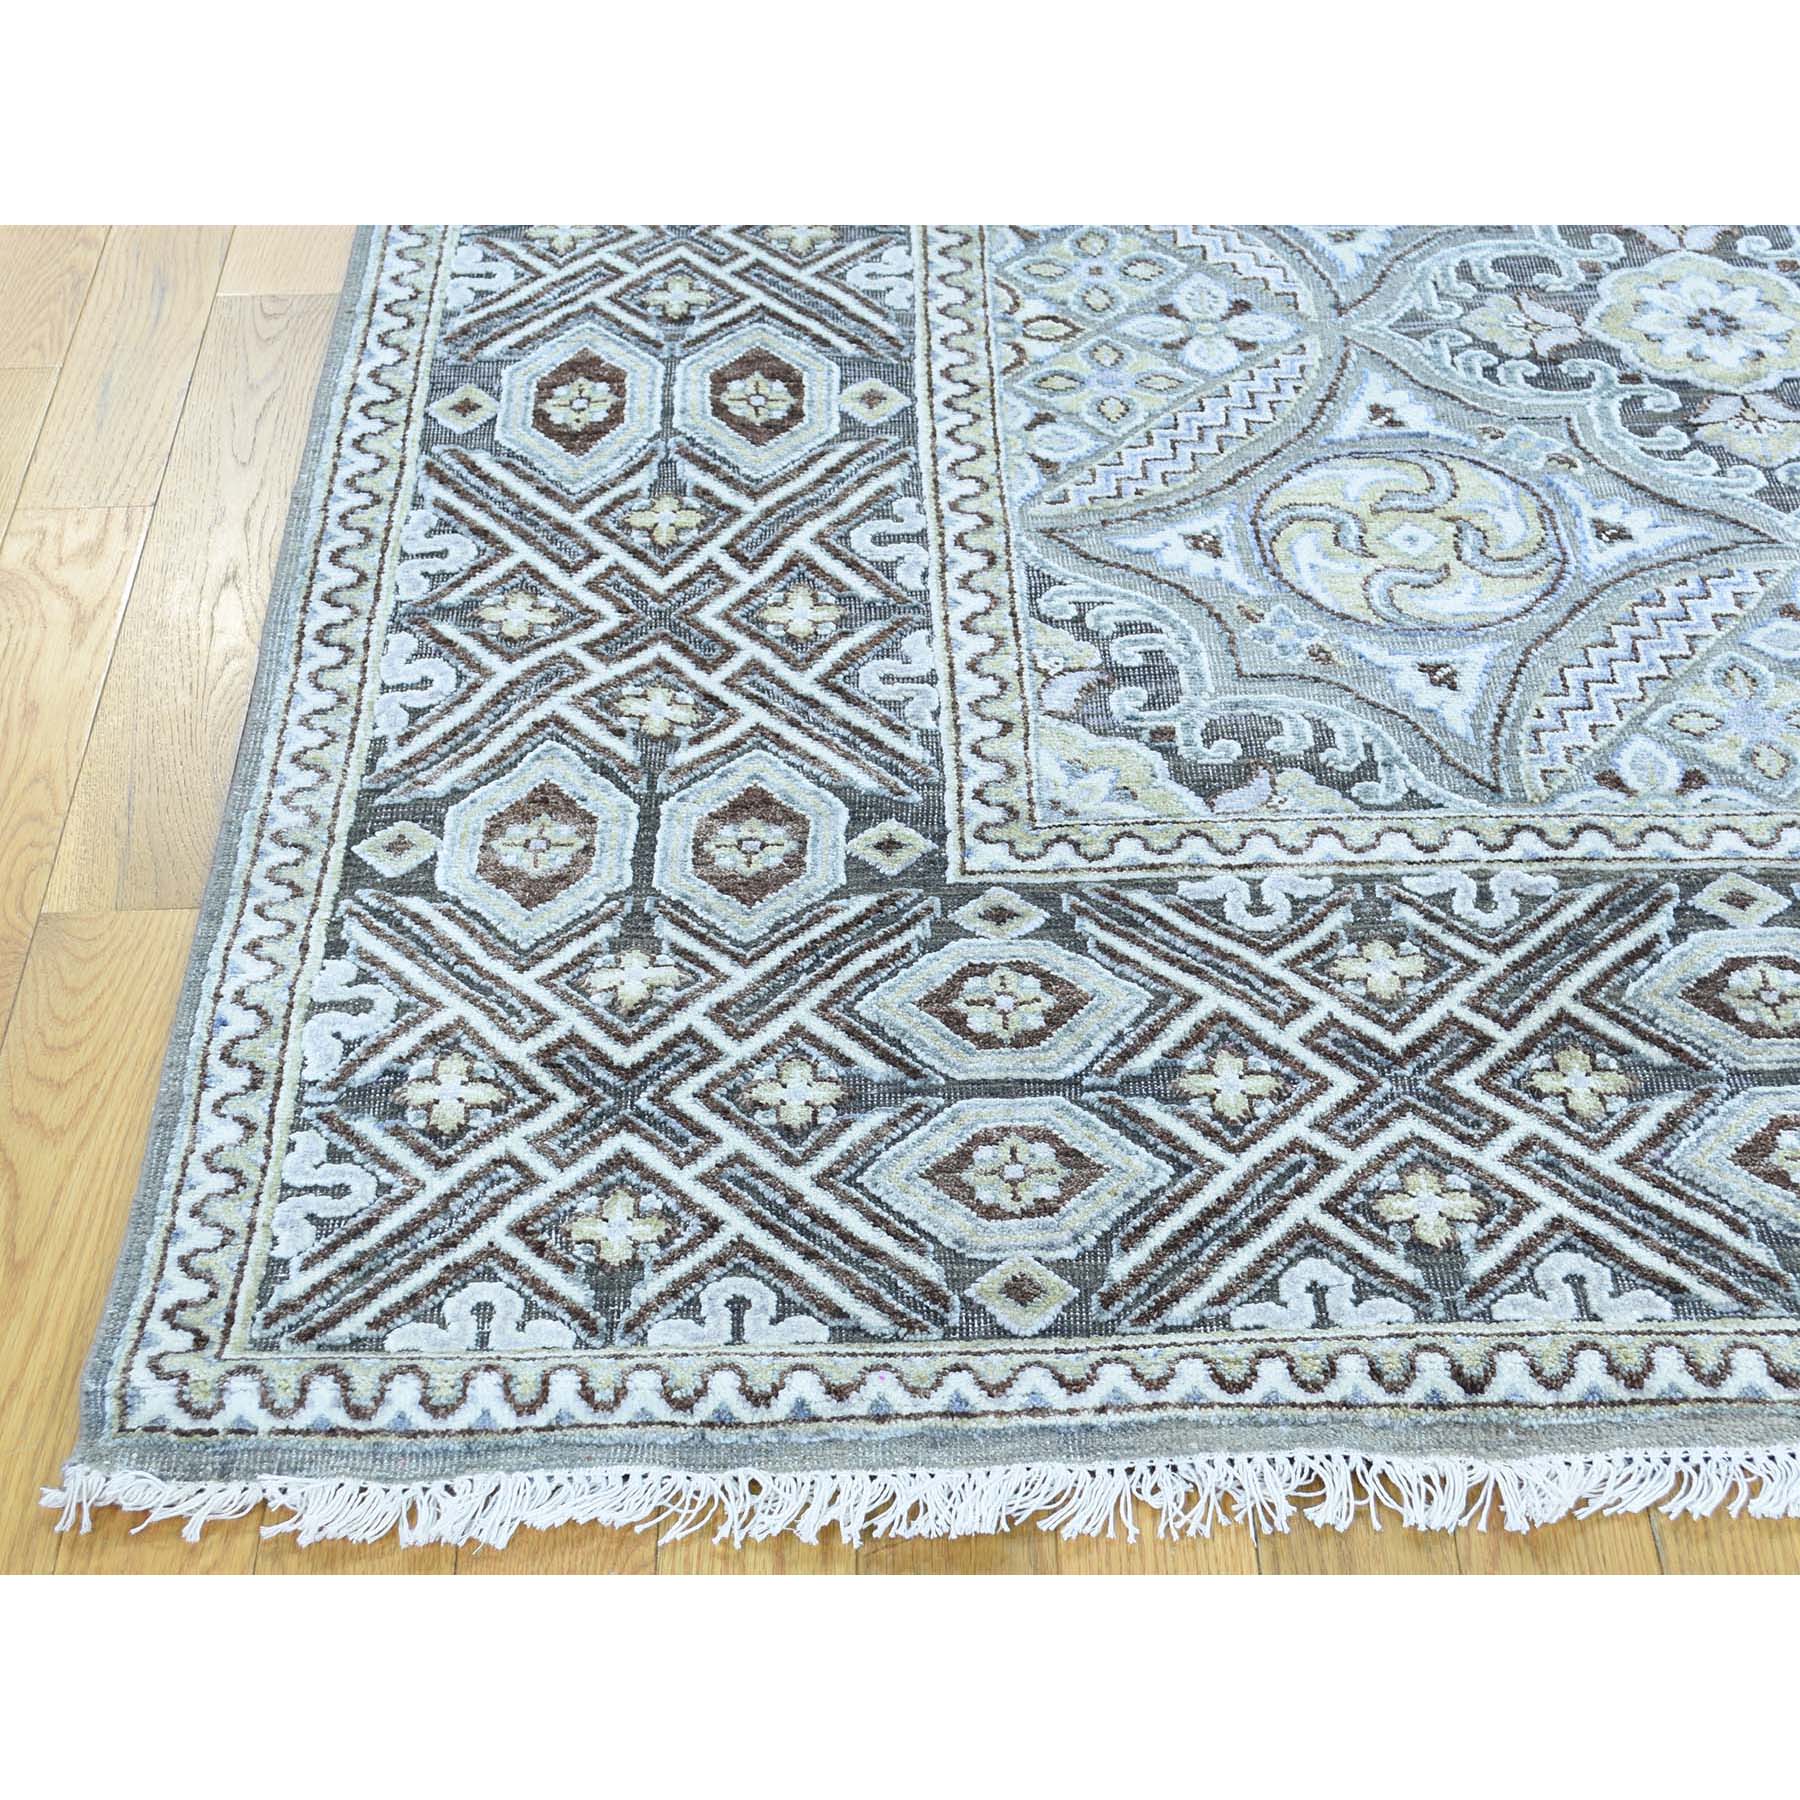 10-1 x14-4  Mughal Inspired Medallions Textured Wool and Silk Hand-Knotted Oriental Rug 